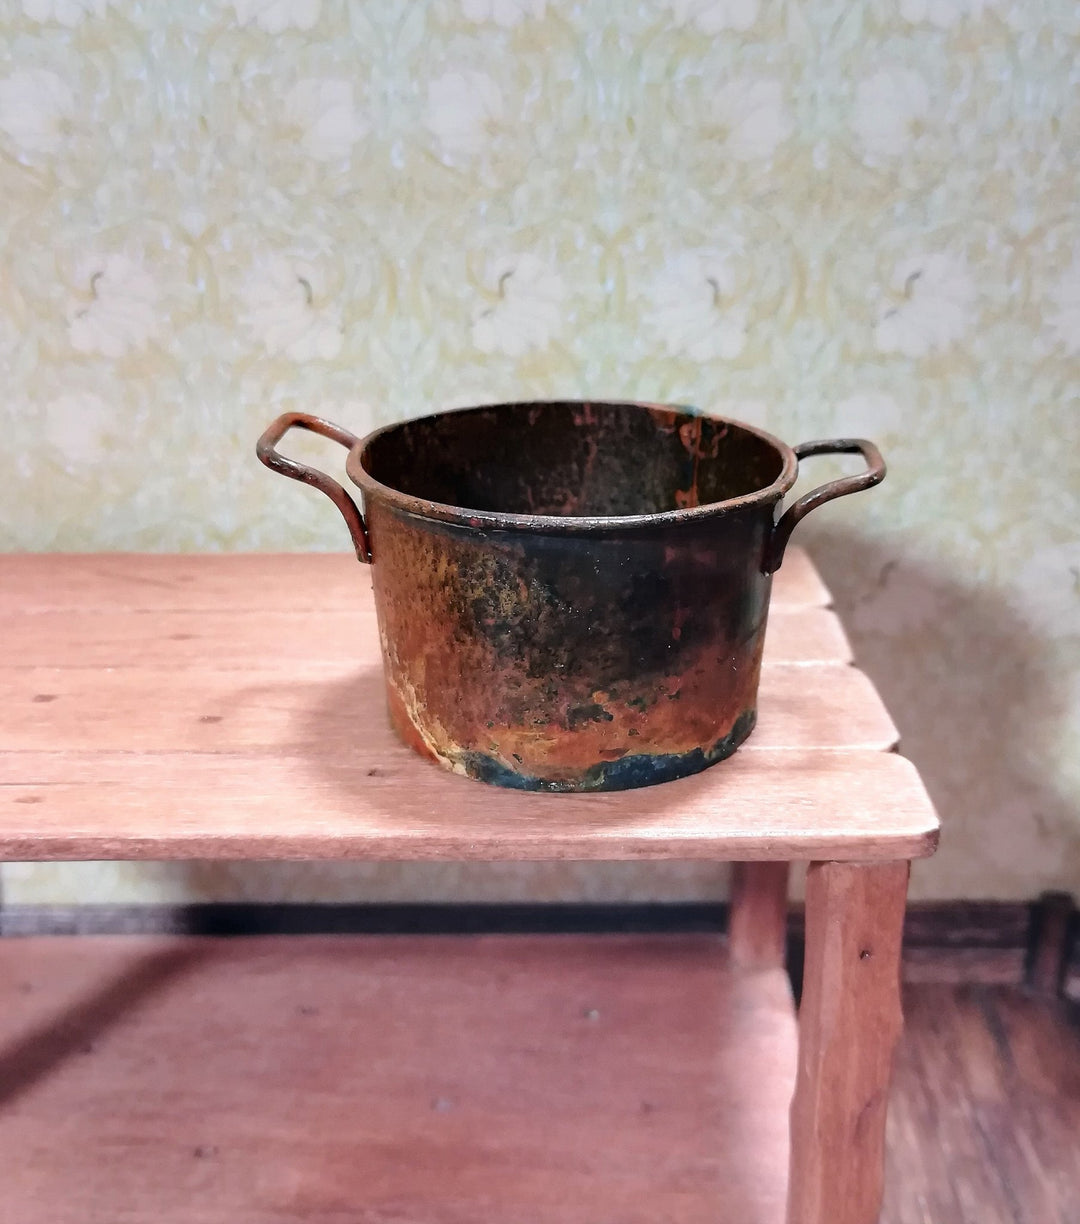 Dollhouse Miniature Metal Vat with Handles Large Rusted Aged 1:12 Scale - Miniature Crush